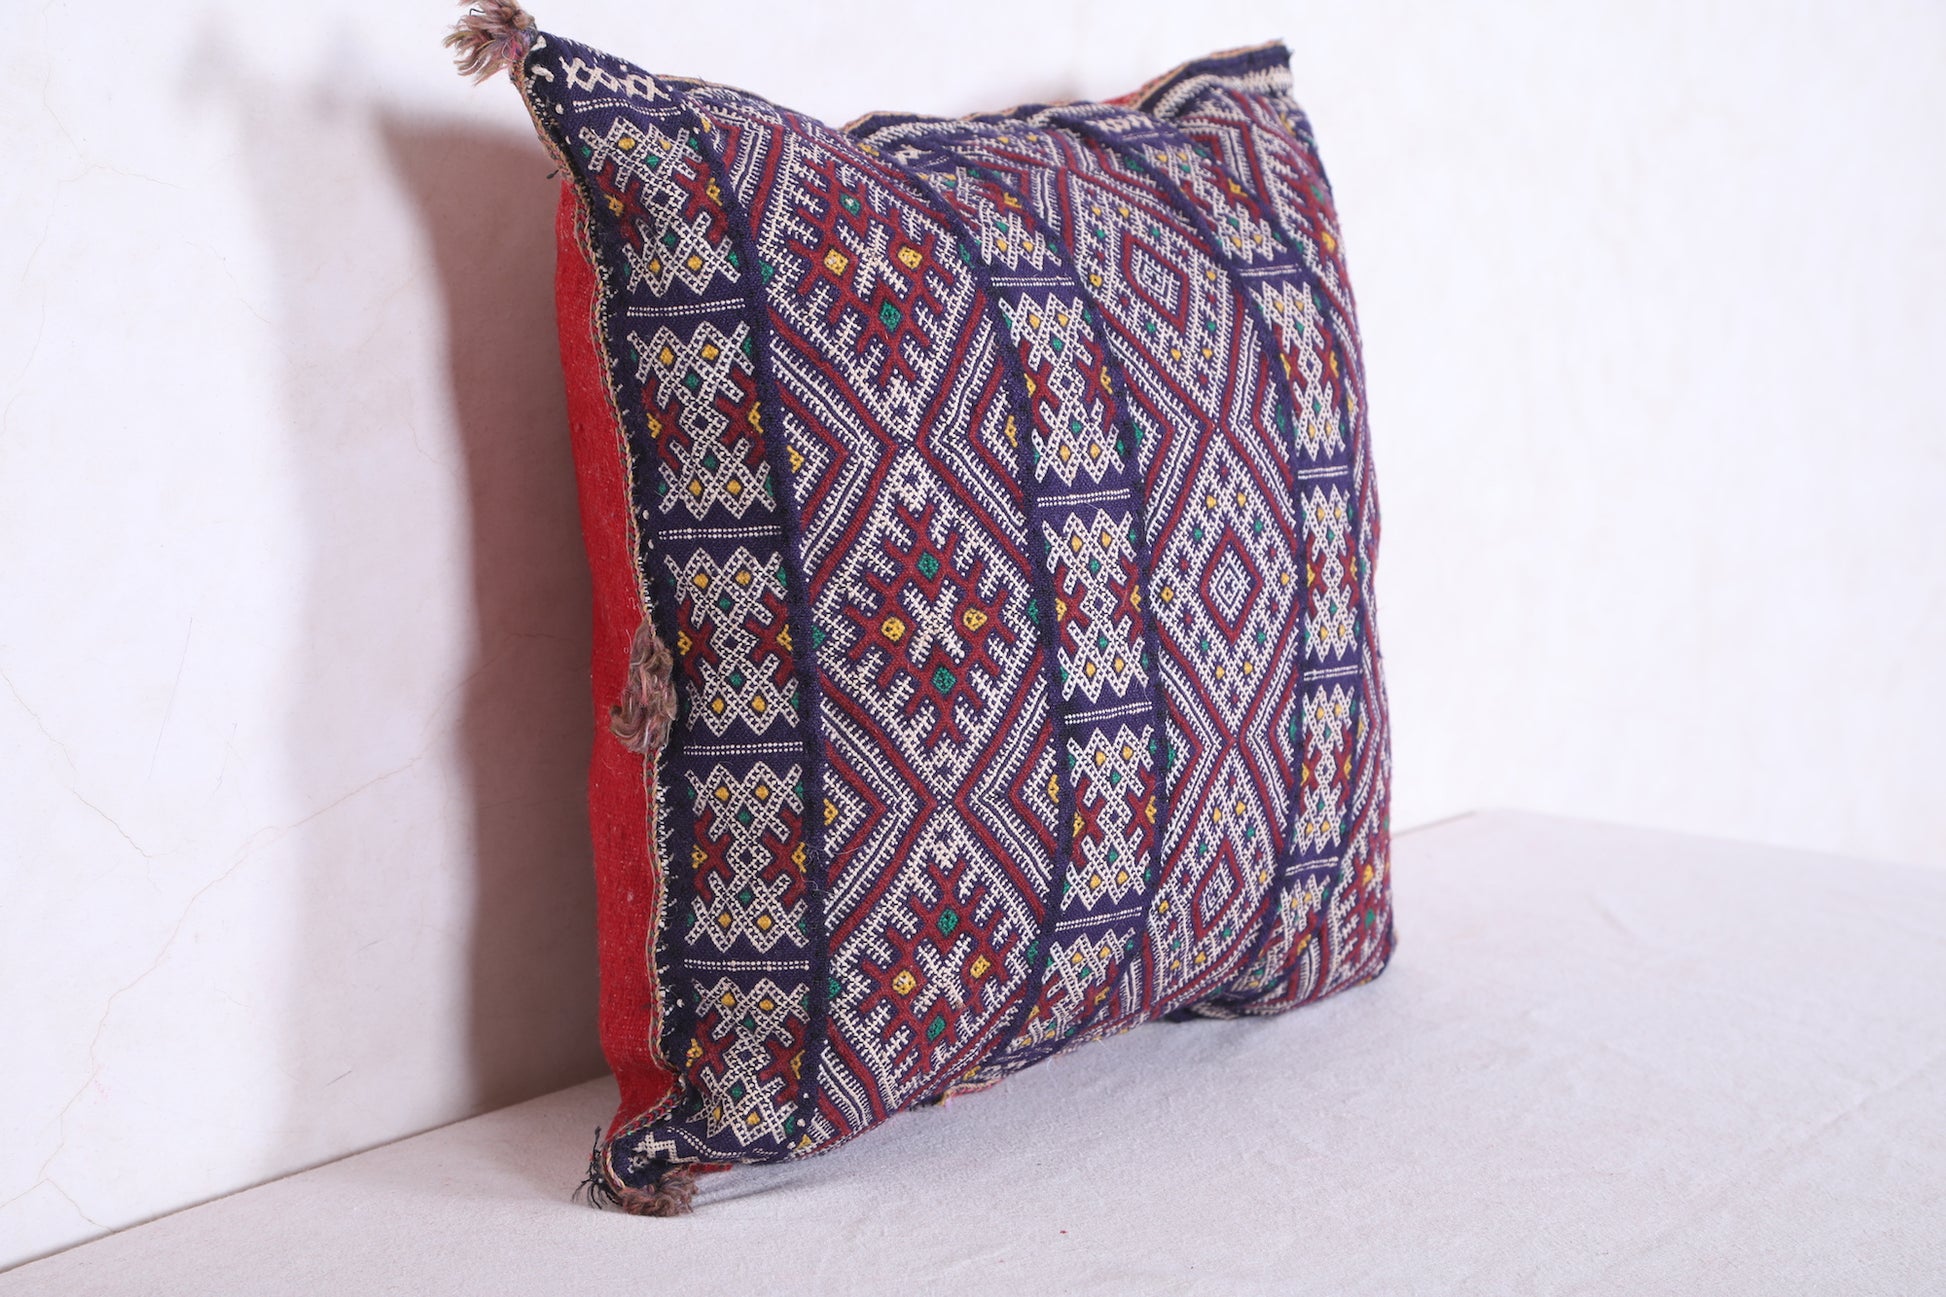 Moroccan handmade kilim pillow 18.1 INCHES X 18.8 INCHES